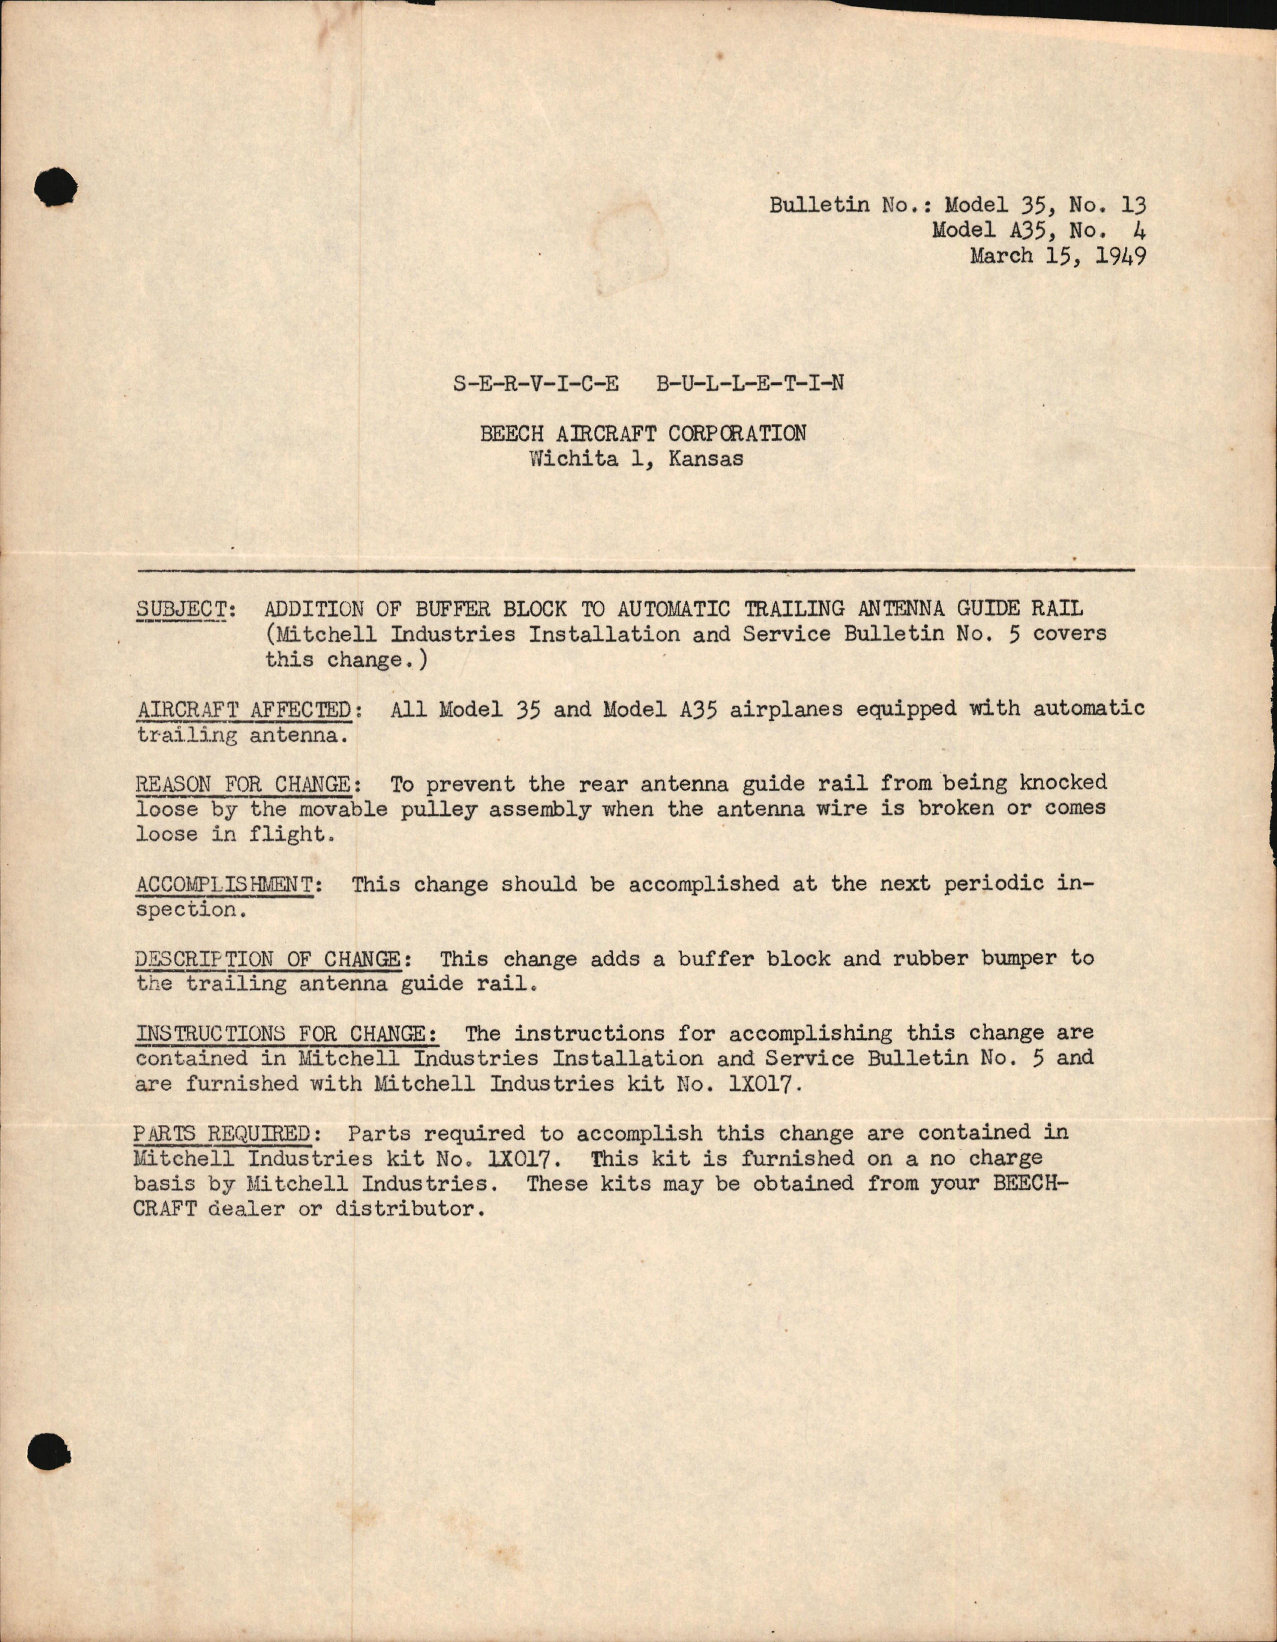 Sample page 1 from AirCorps Library document: Addition of Buffer Block to Automatic Trailing Antenna Guide Rail